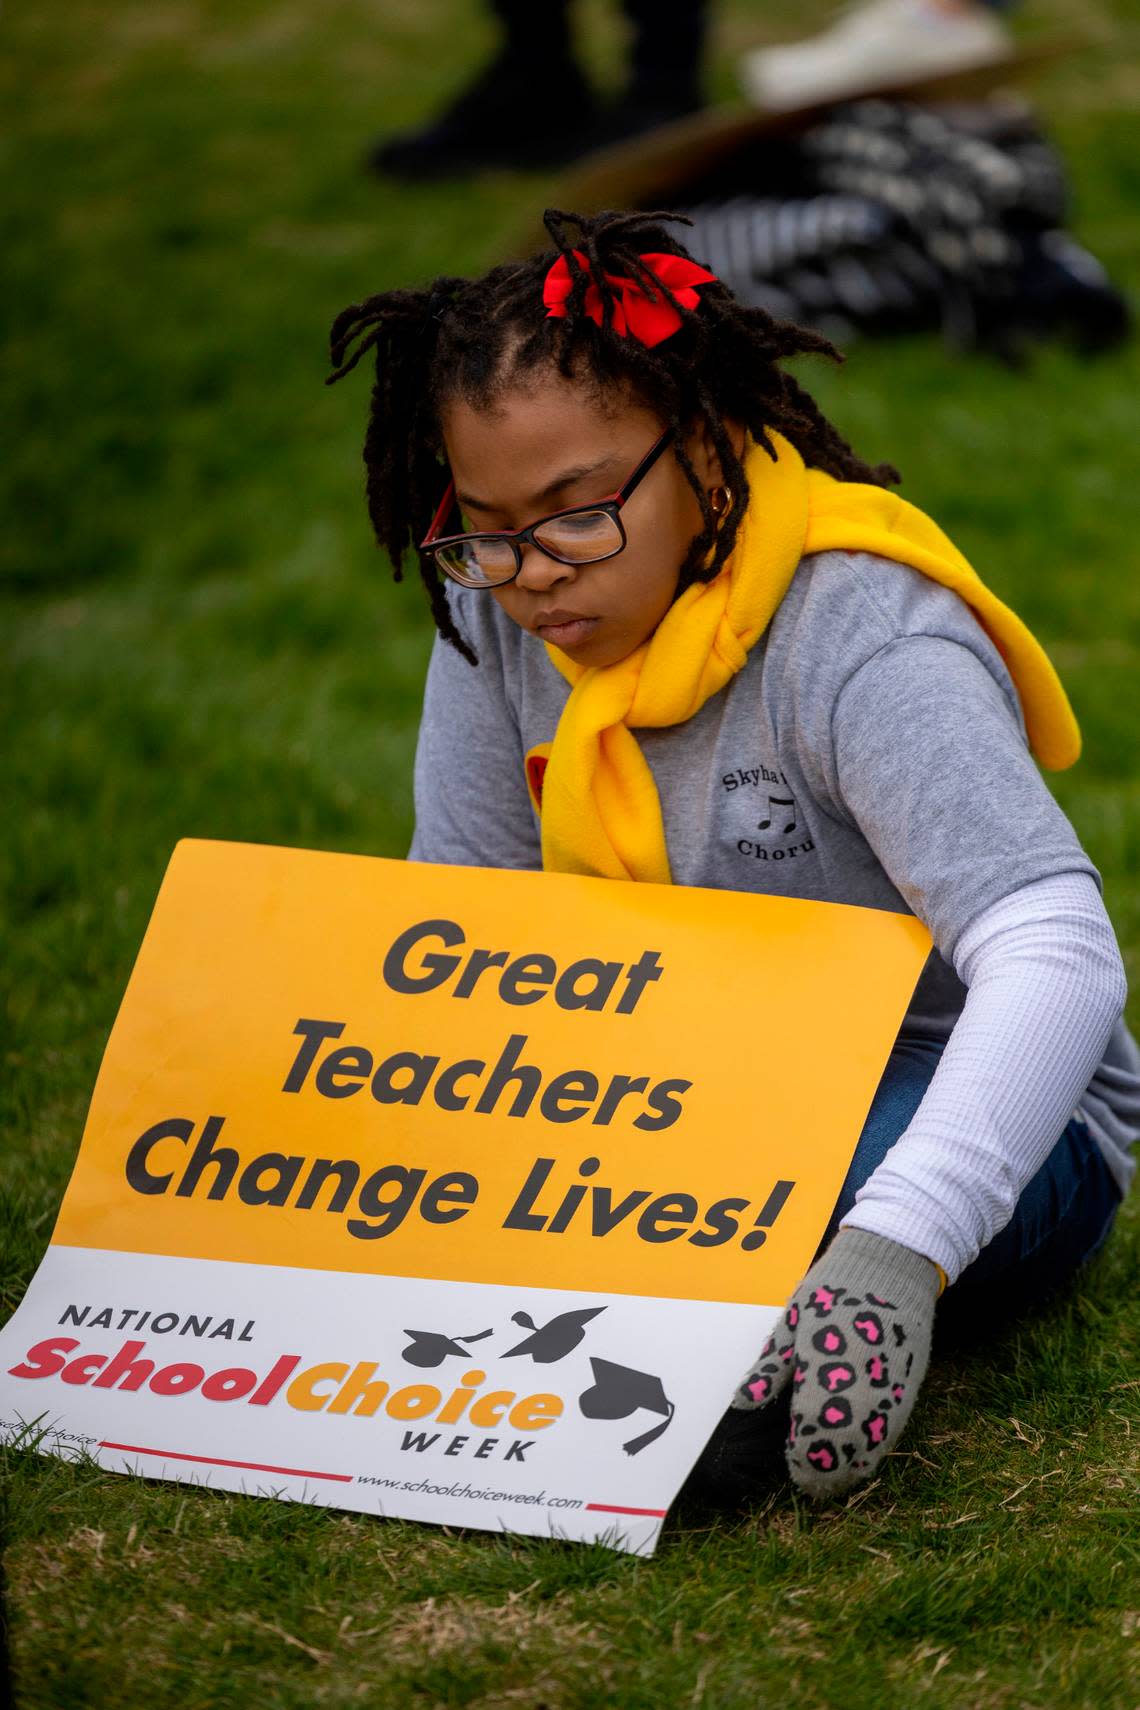 School voucher supporters celebrate National School Choice Week during a rally on Halifax Mall in front of the Legislative Building in Raleigh on Jan. 24. North Carolina could see a 60% increase this year in the number of students receiving a private school voucher now that income limits for families have been removed.